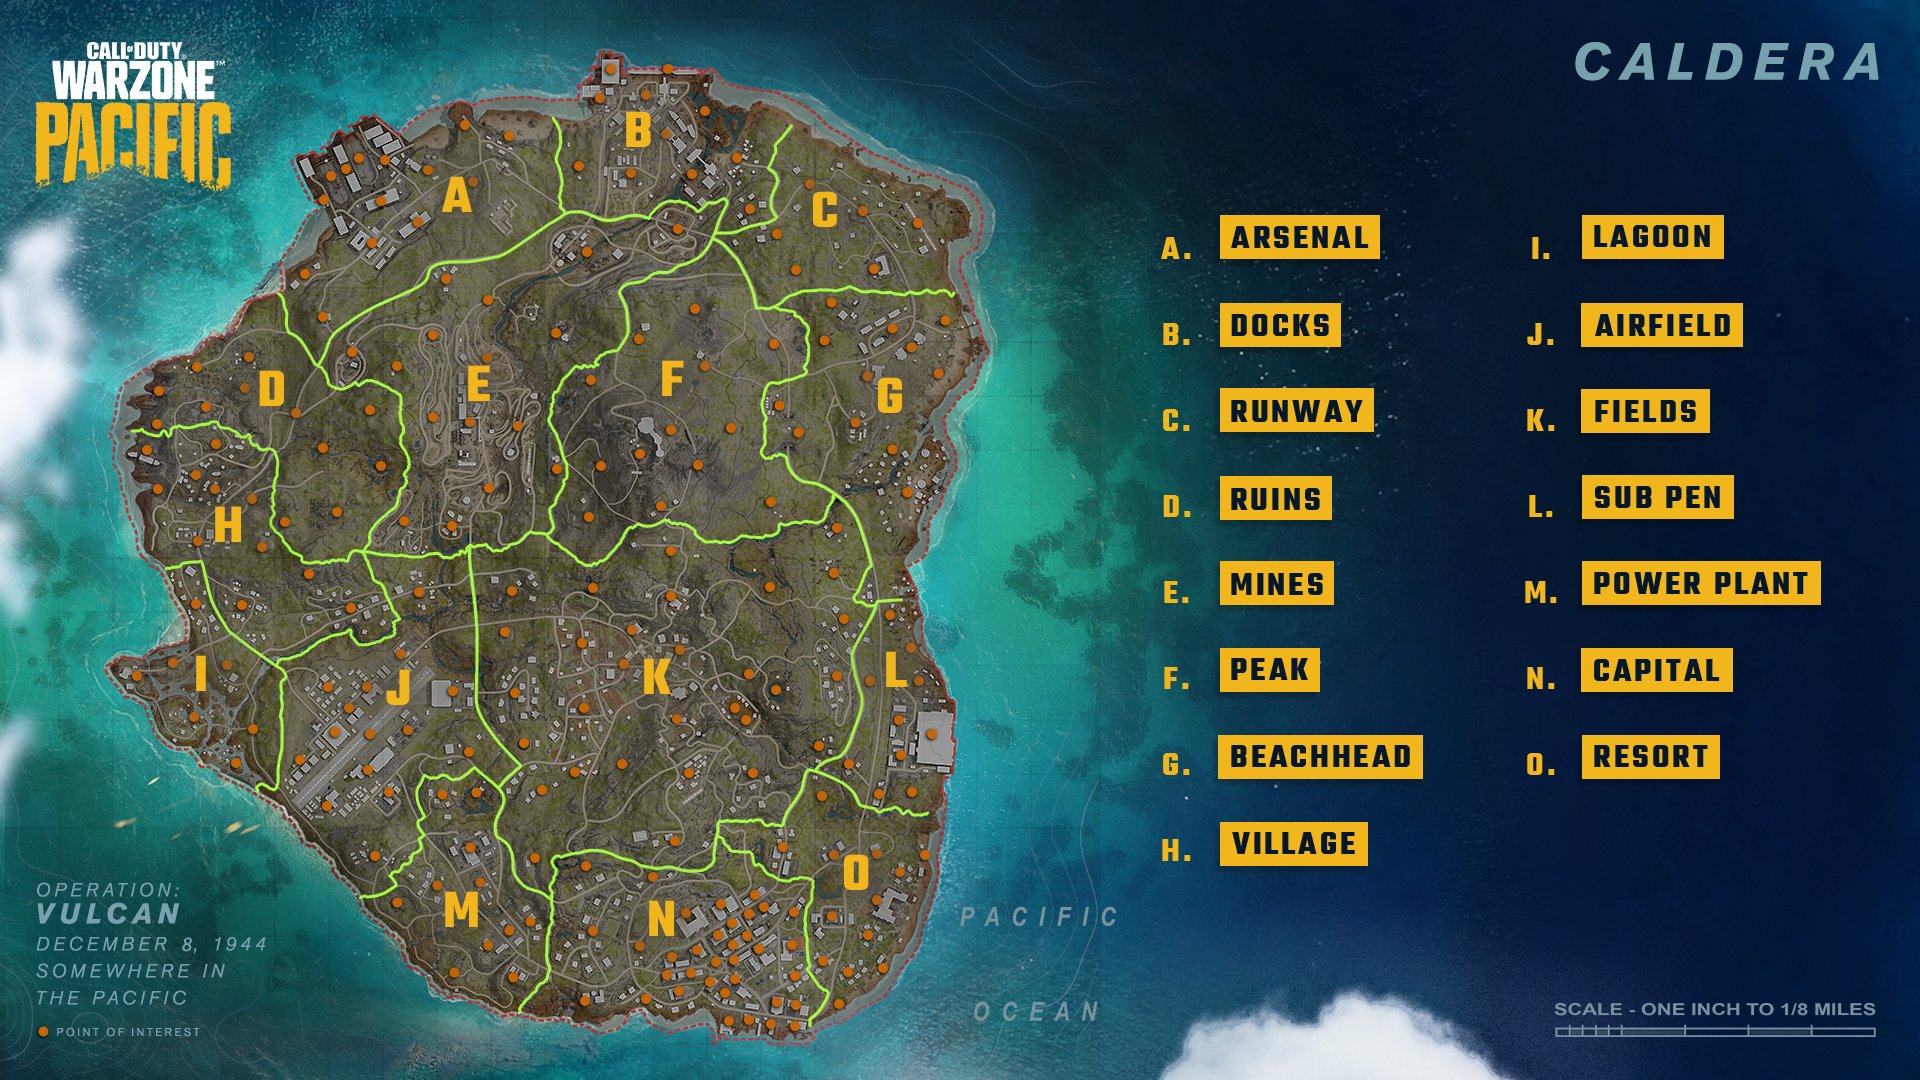 ❌ marks your drop.

Where will you be dropping? #Warzone